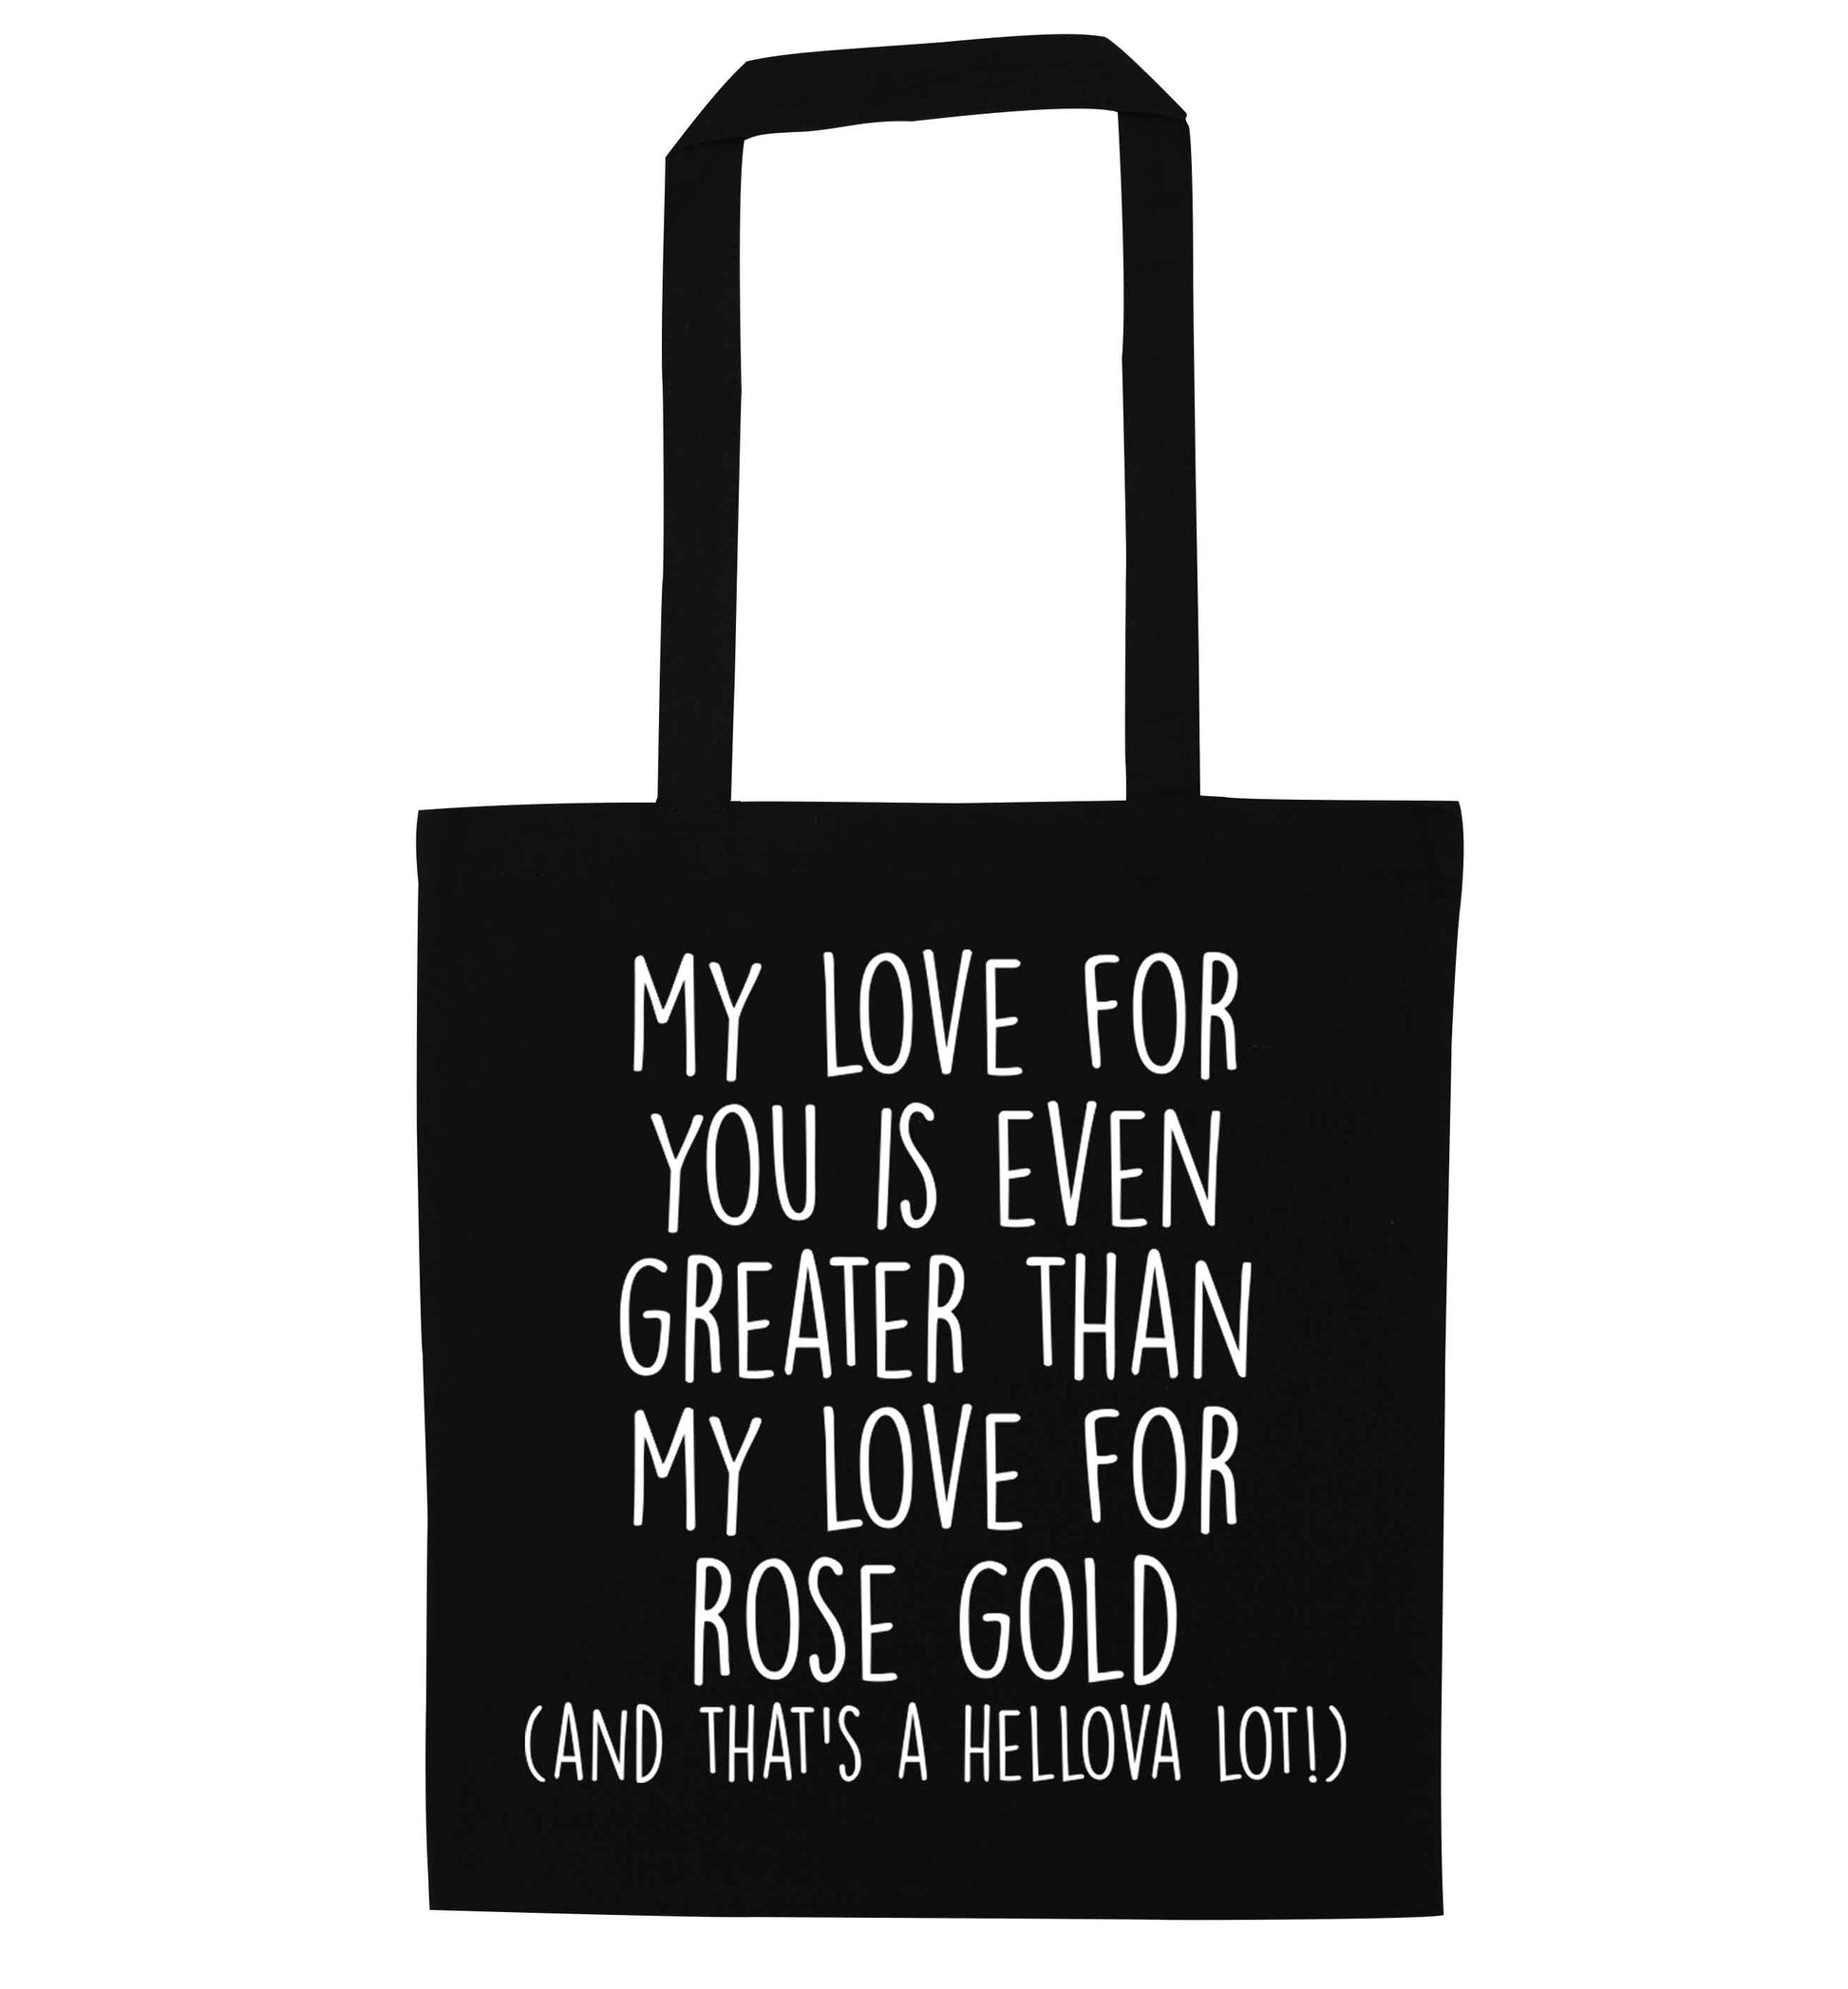 My love for you is even greater than my love for rose gold (and that's a hellova lot) black tote bag